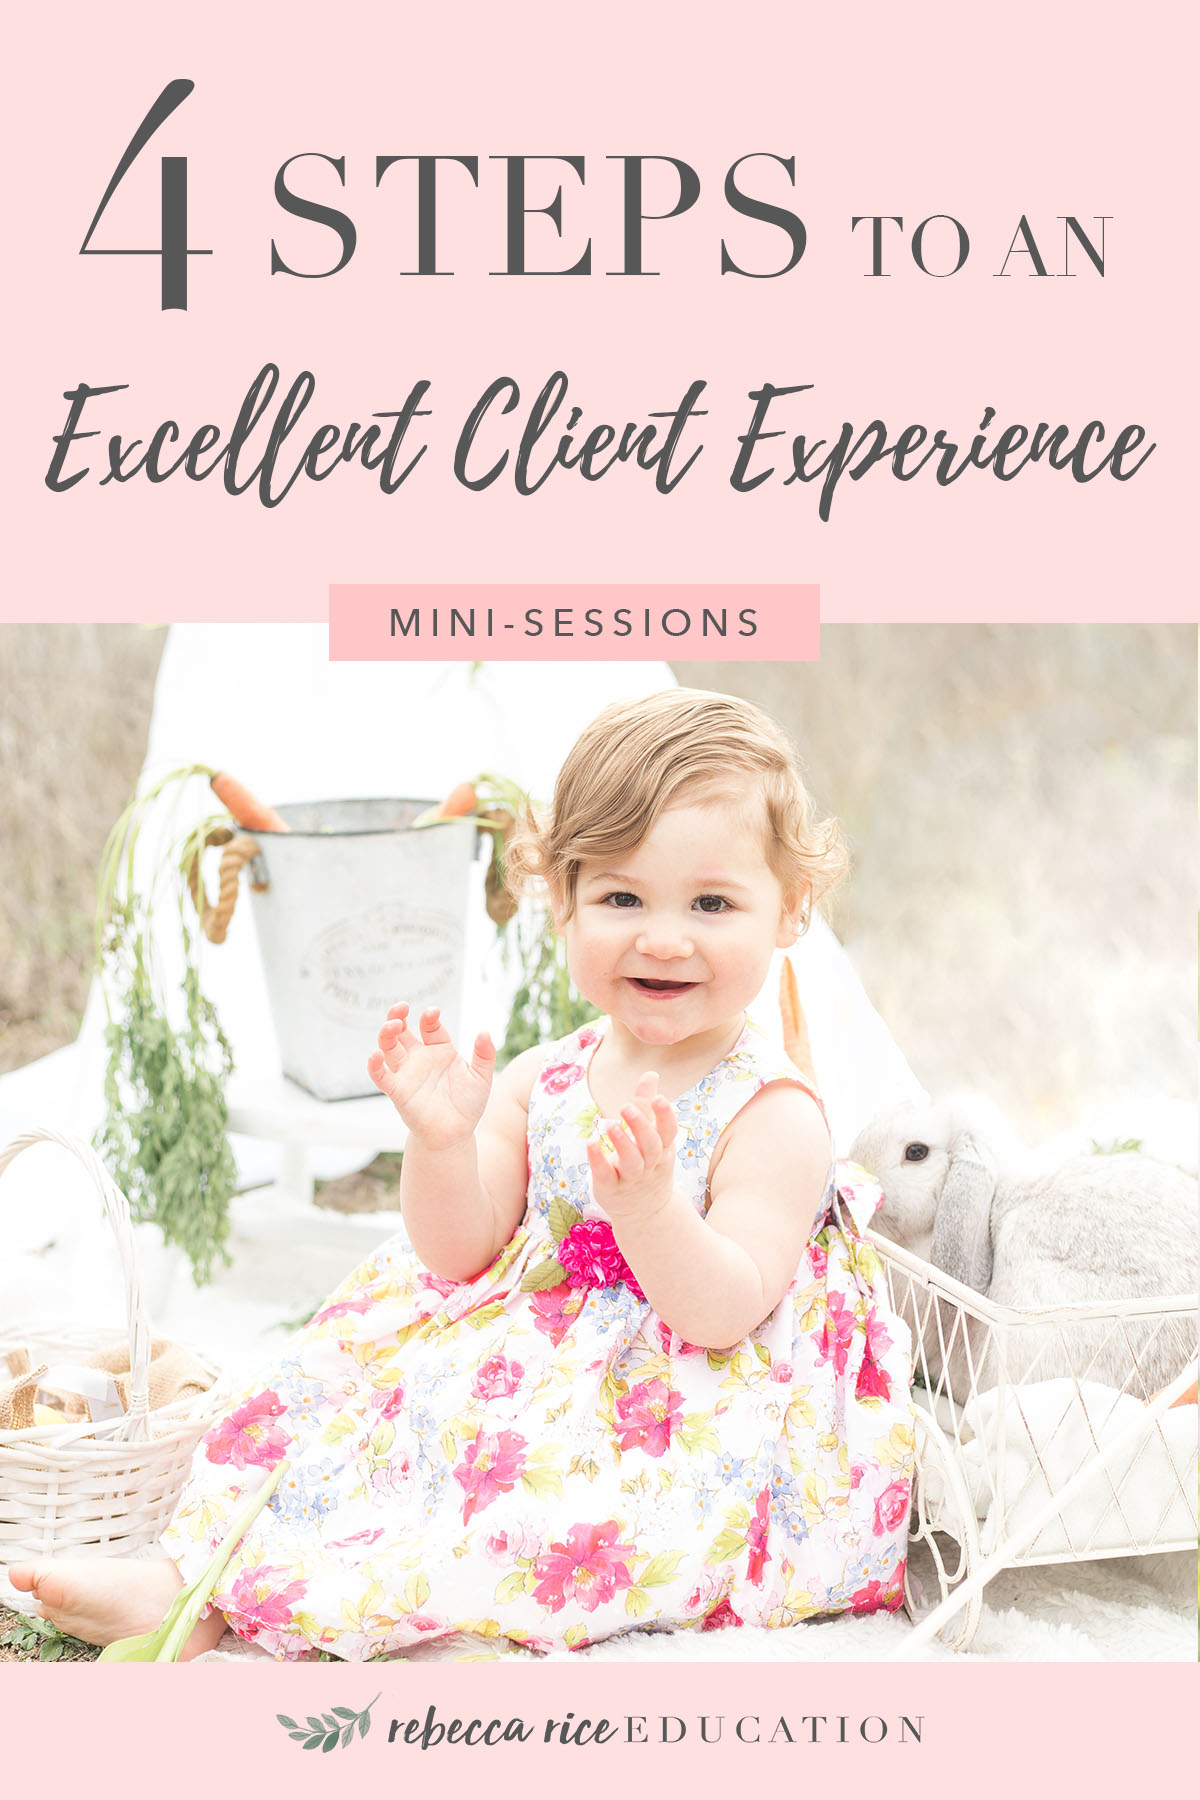 4 steps to an excellent client experience mini-sessions minis rebecca rice education bunny minis easter